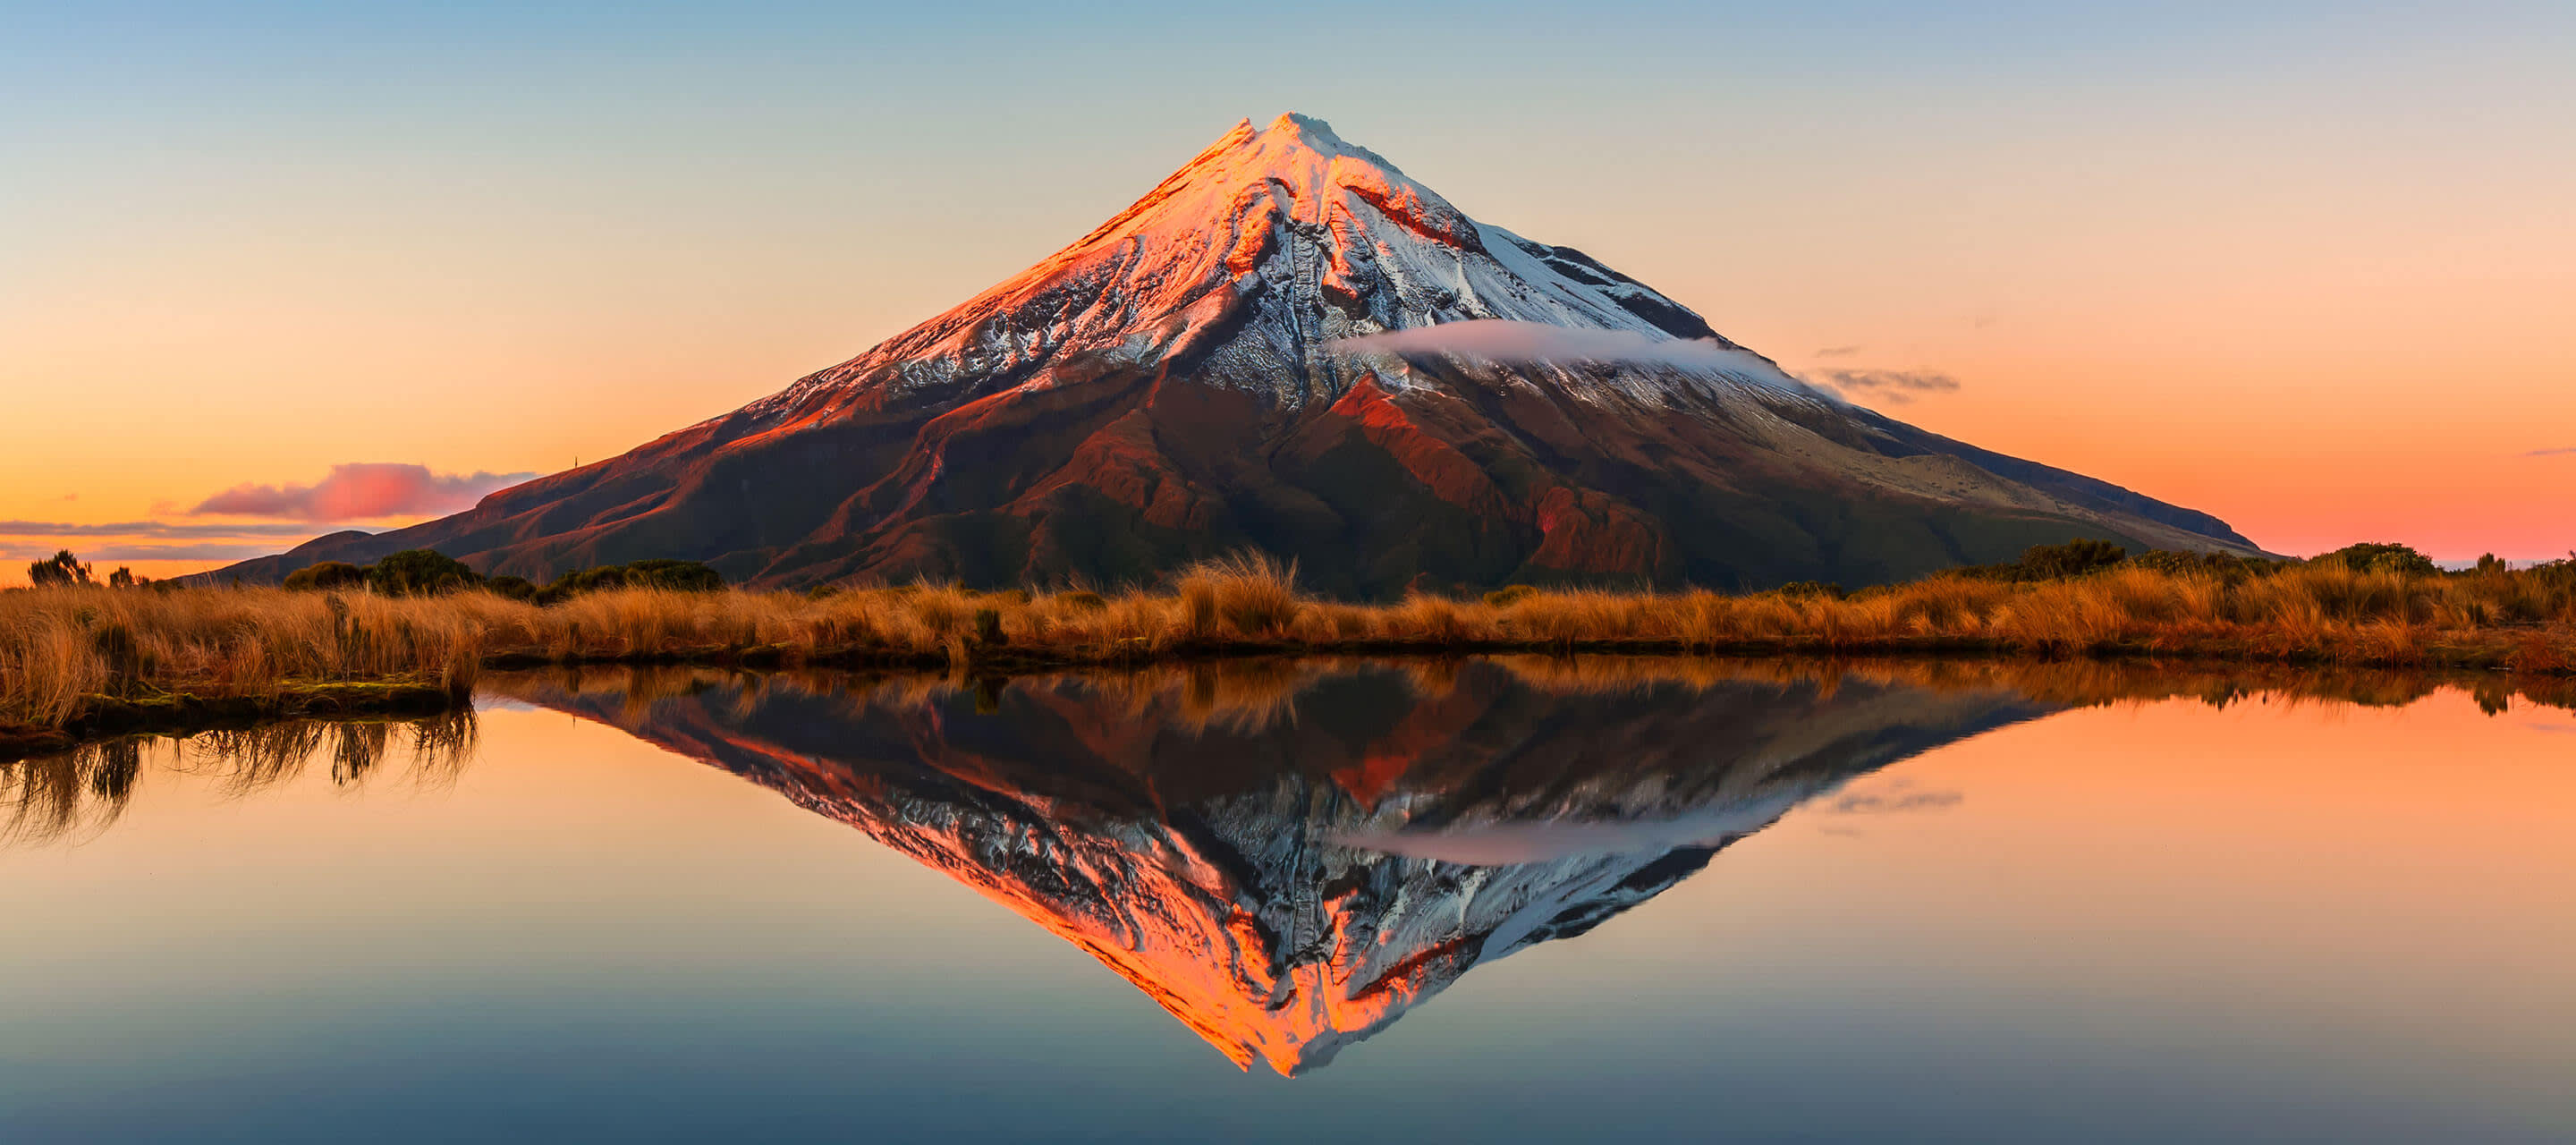 Mountain at sunset with a reflection in a body of water